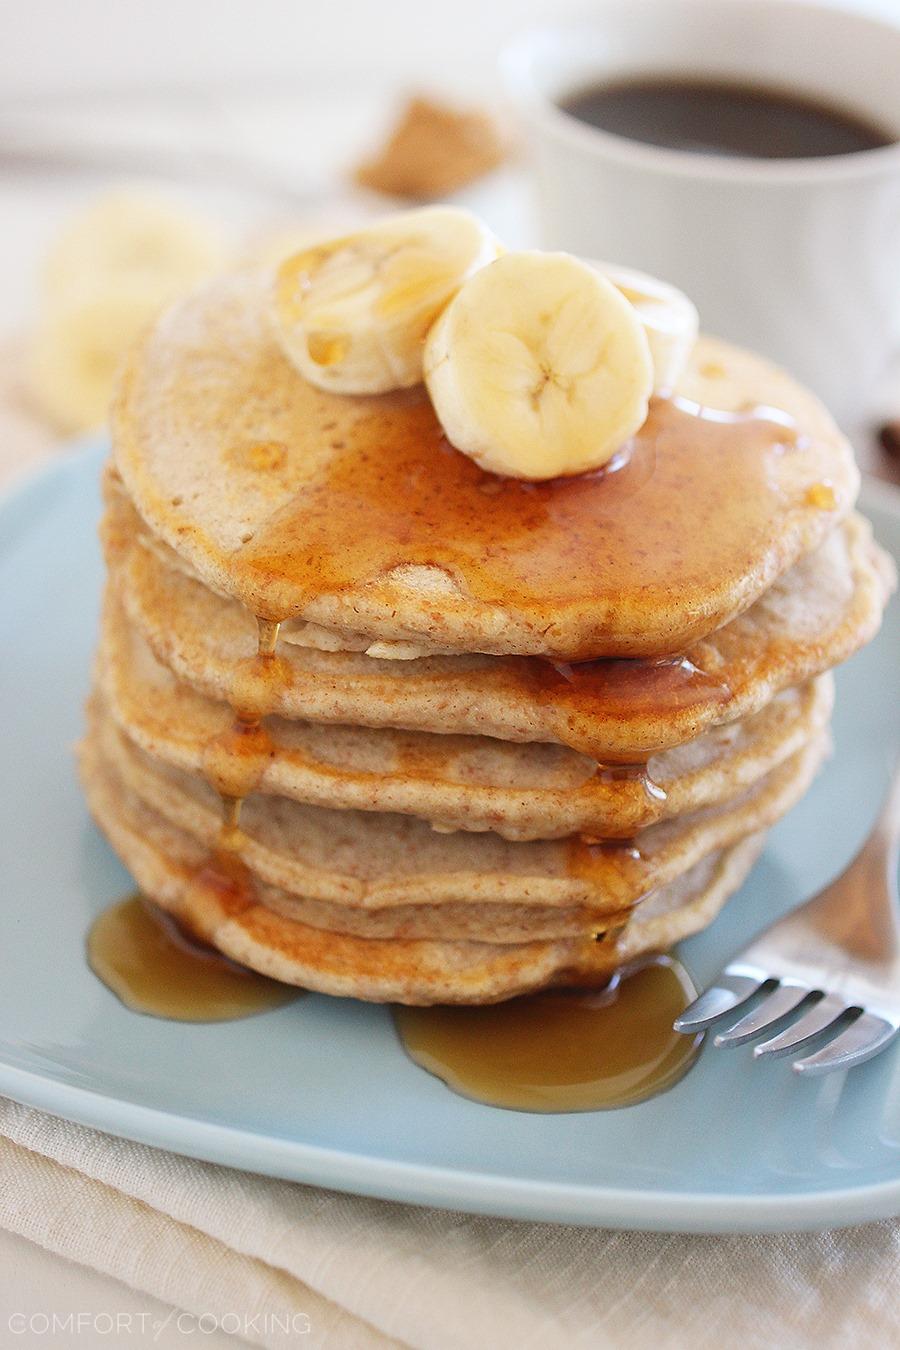 Whole Wheat Peanut Butter-Banana Pancakes – So soft & fluffy! Mix up the batter one day ahead and cook 'em up for a delish weekend morning treat!| thecomfortofcooking.com